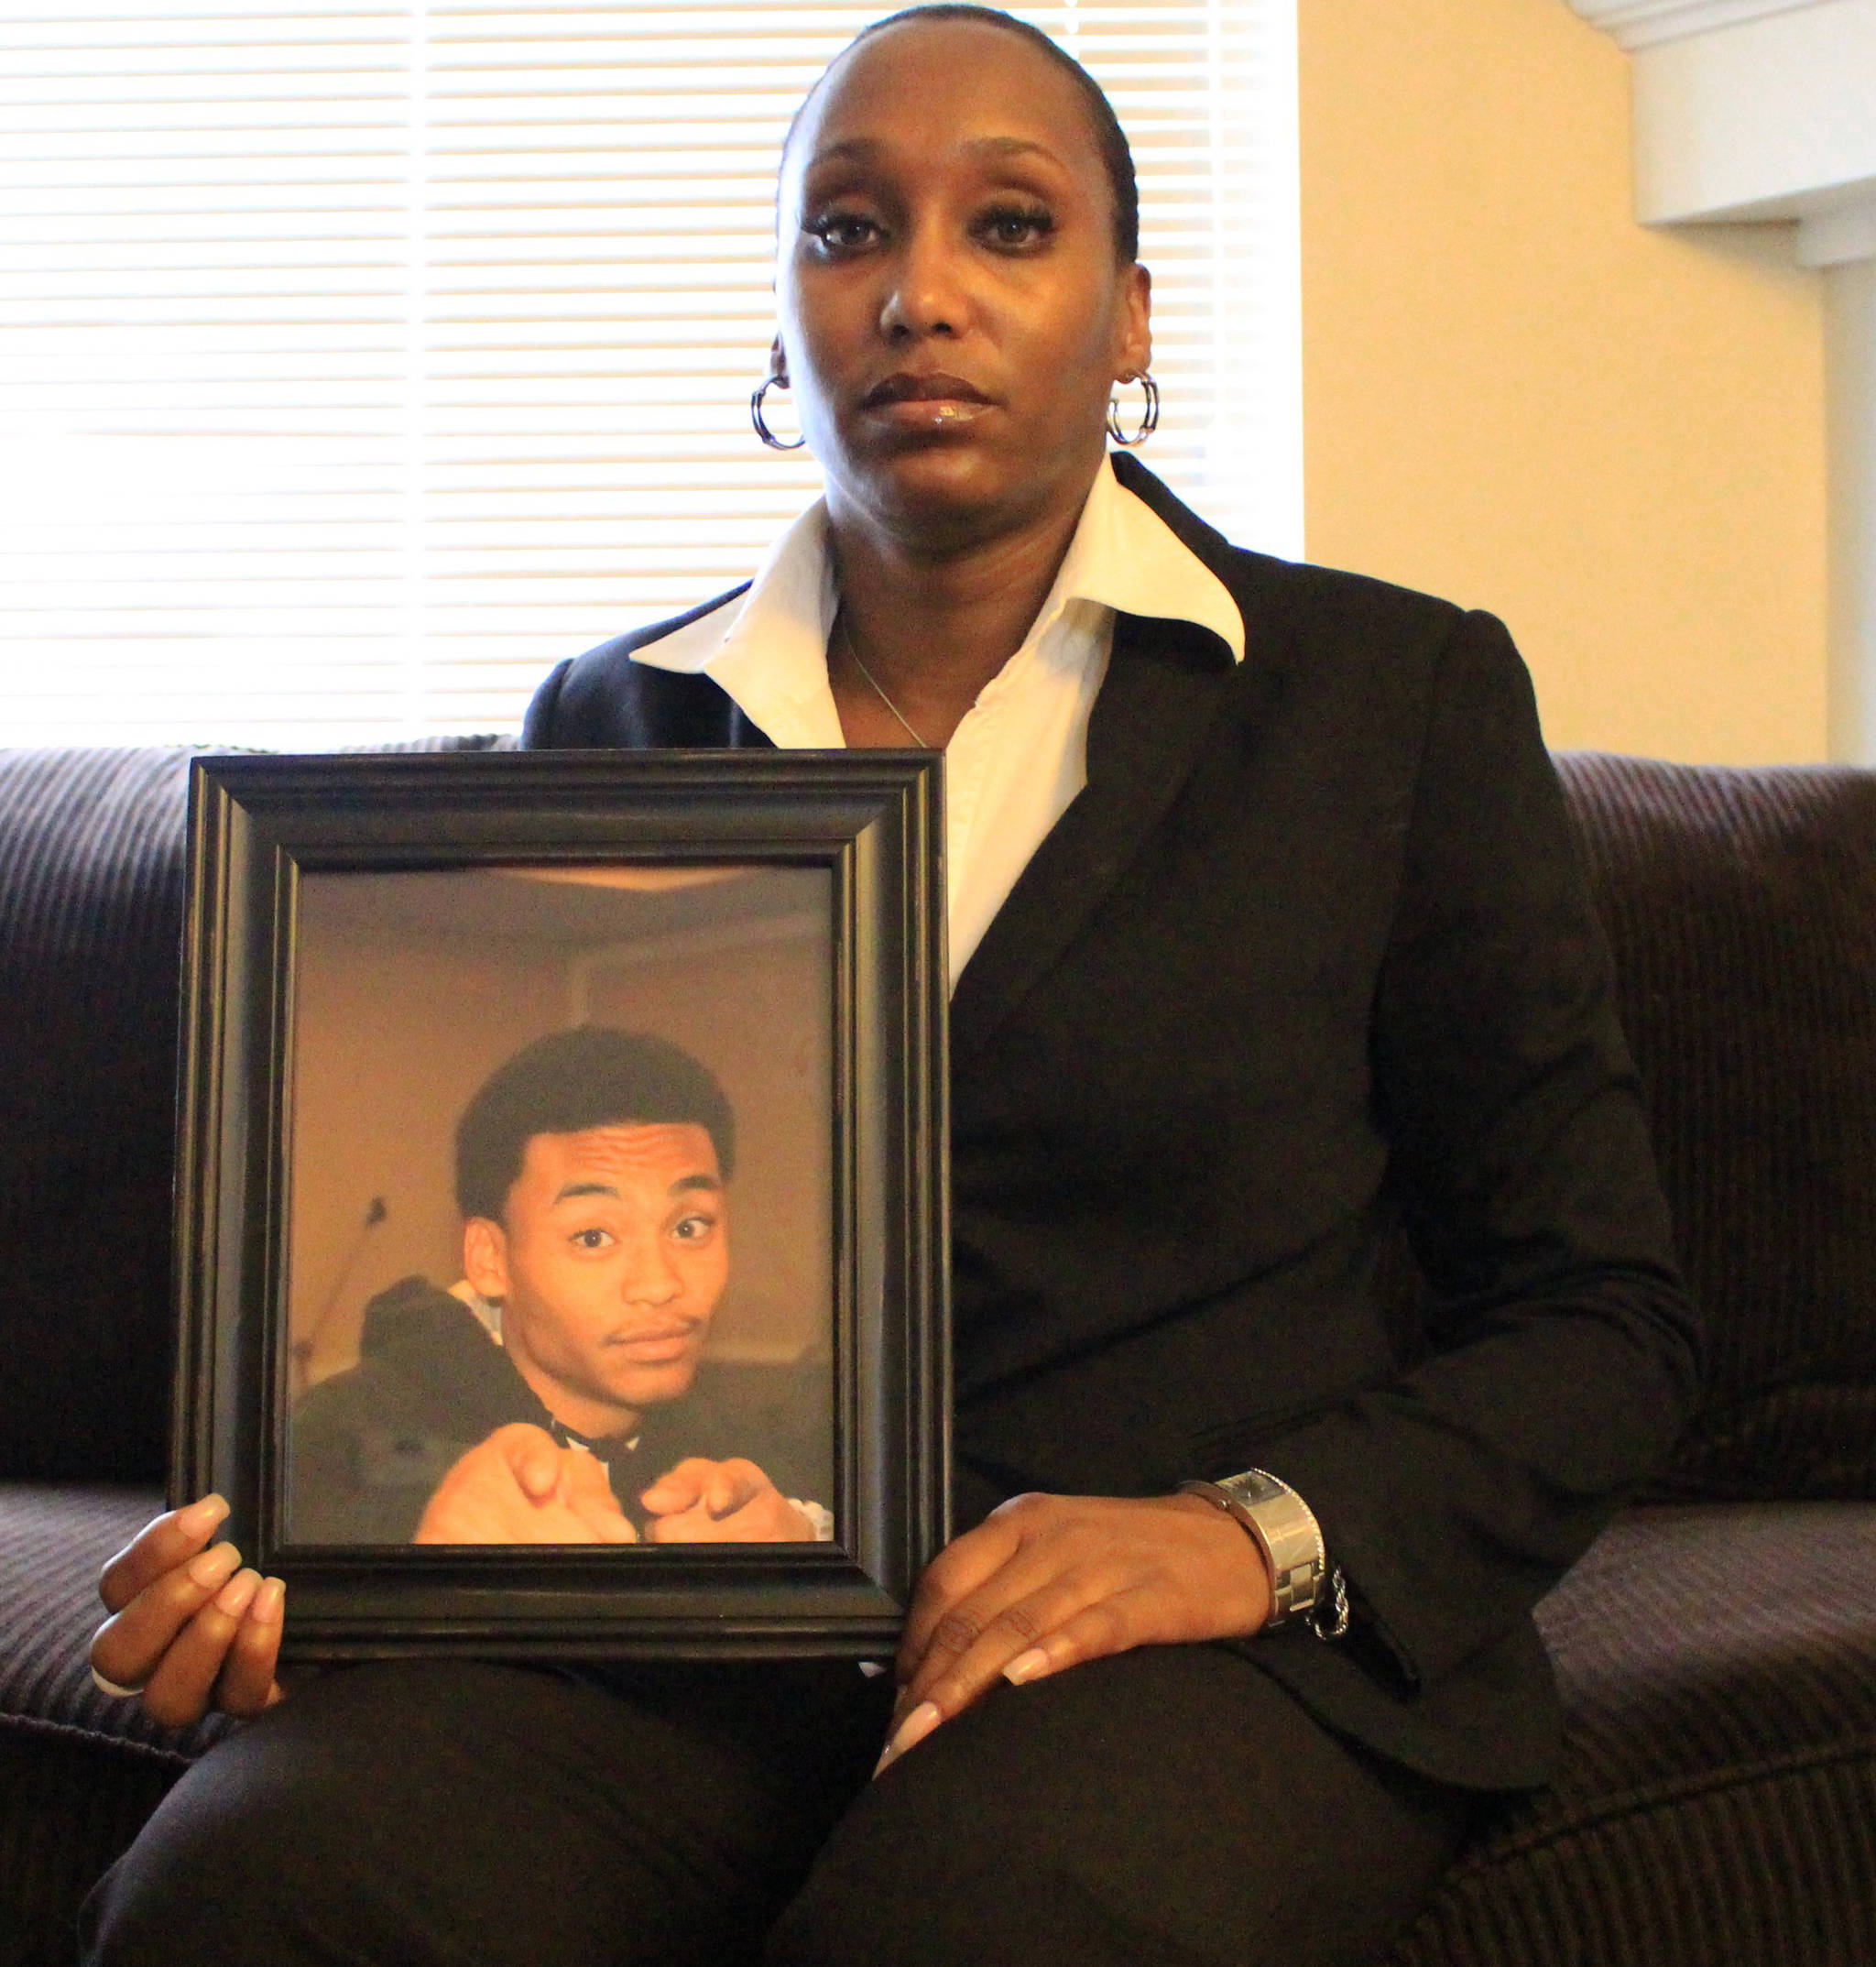 Shalisa Hayes’s son, Billy Ray, was shot and killed in August 2011 leaving a party in Tacoma. He was 17 years old. COURTESY PHOTO, Shalisa Hayes/State Department of Commerce